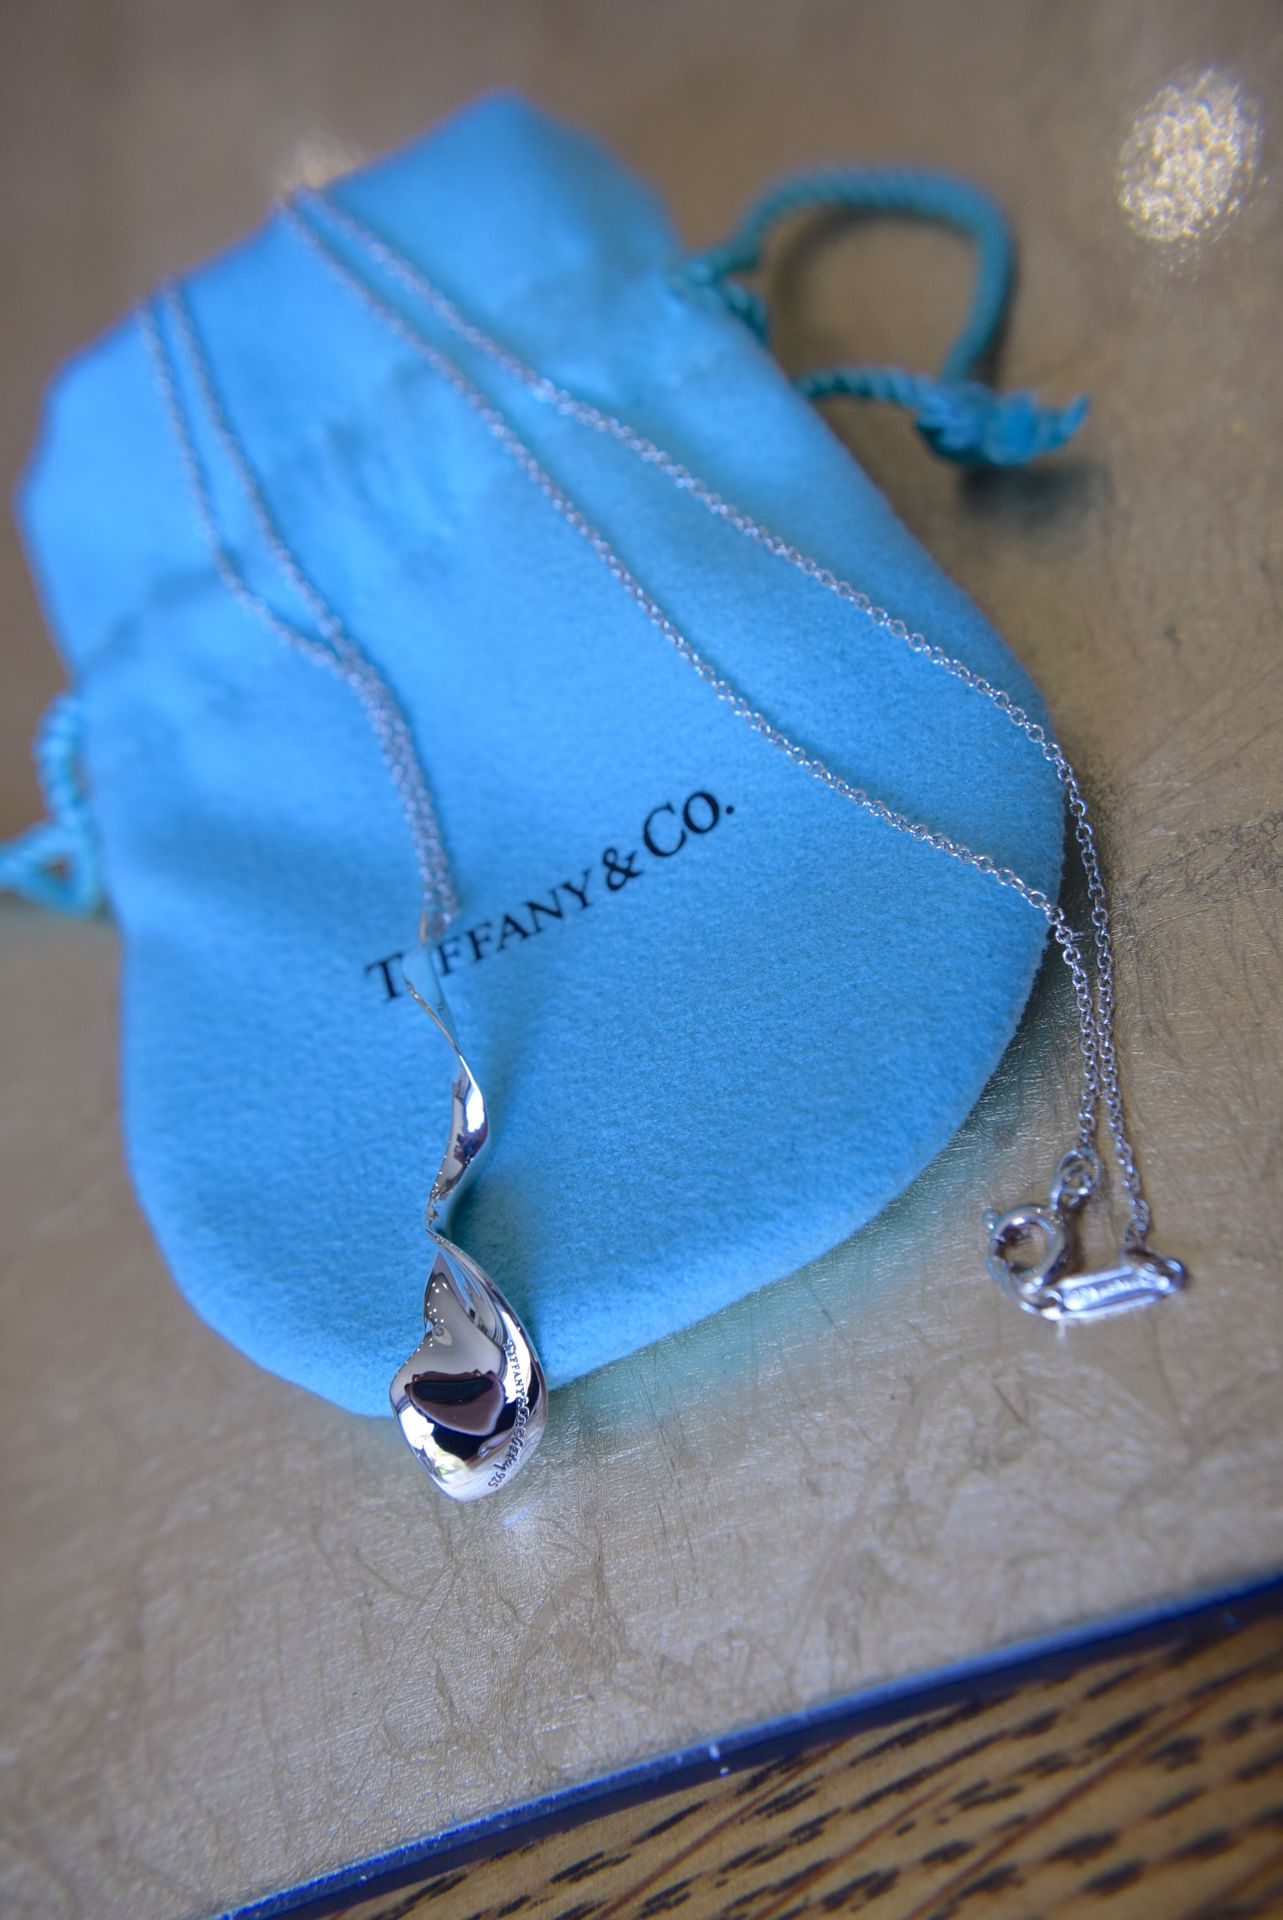 Tiffany & Co. Sterling Silver Frank Gehry ""Orchid Twist Drop"" Necklace - 16"" Chain